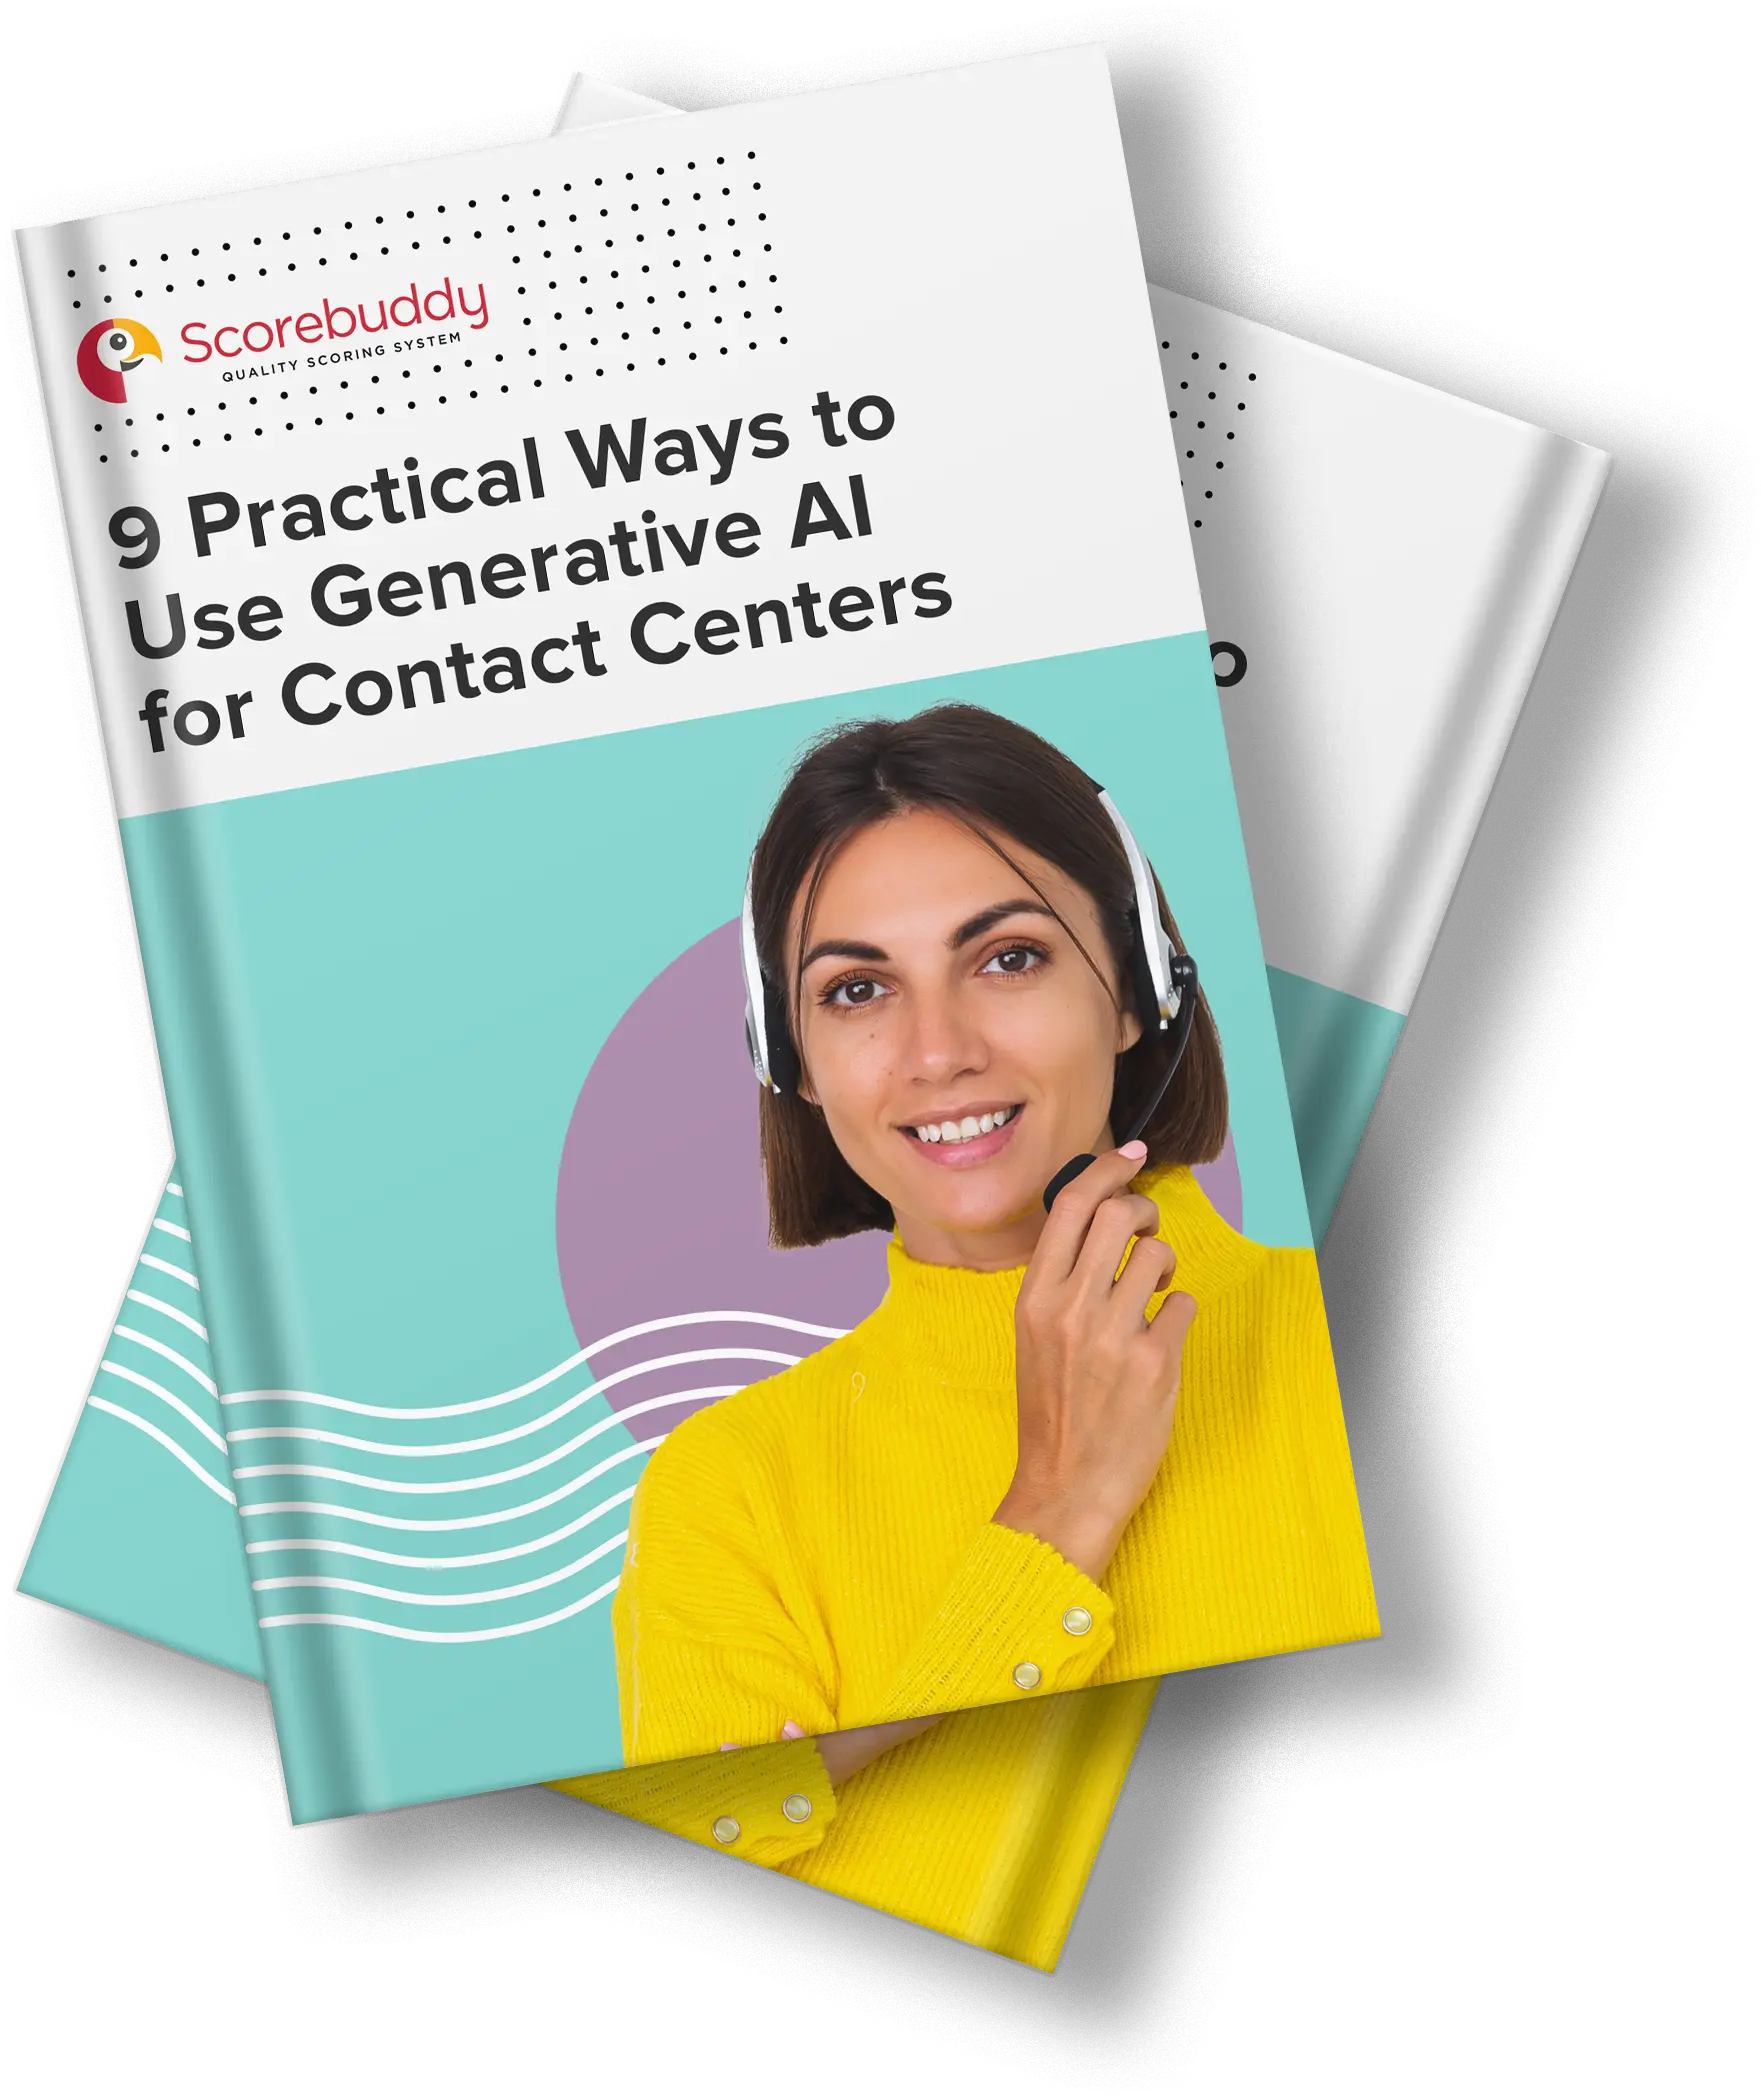 Cover Mockup 9 Practical Ways to Use Generative AI for Contact Centers-v2